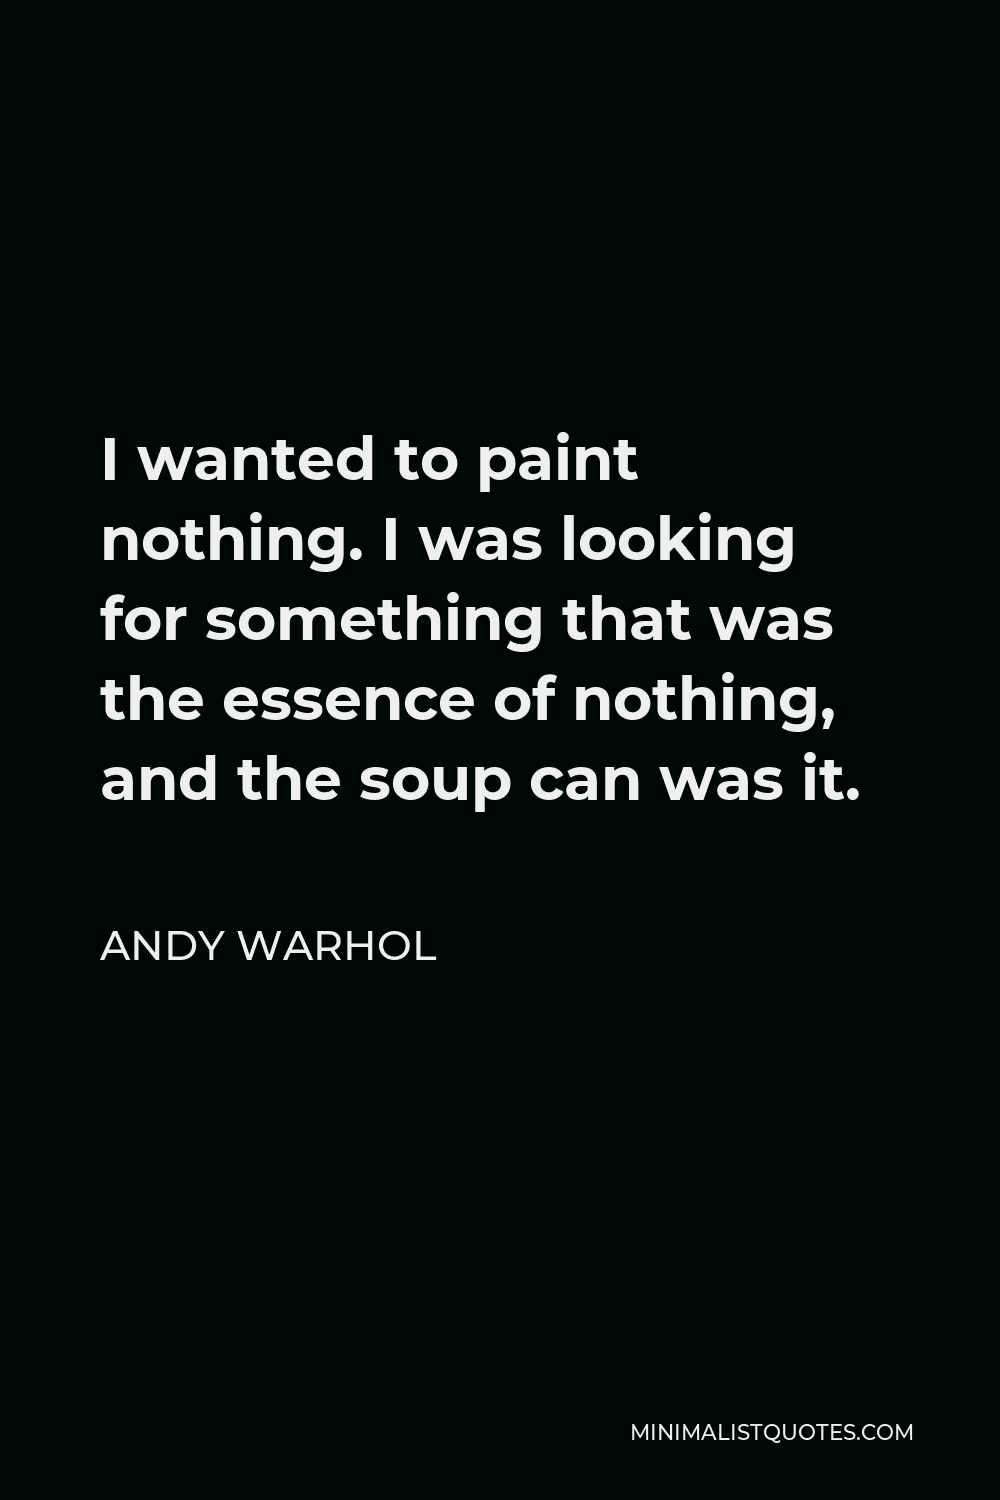 Andy Warhol Quote - I wanted to paint nothing. I was looking for something that was the essence of nothing, and the soup can was it.